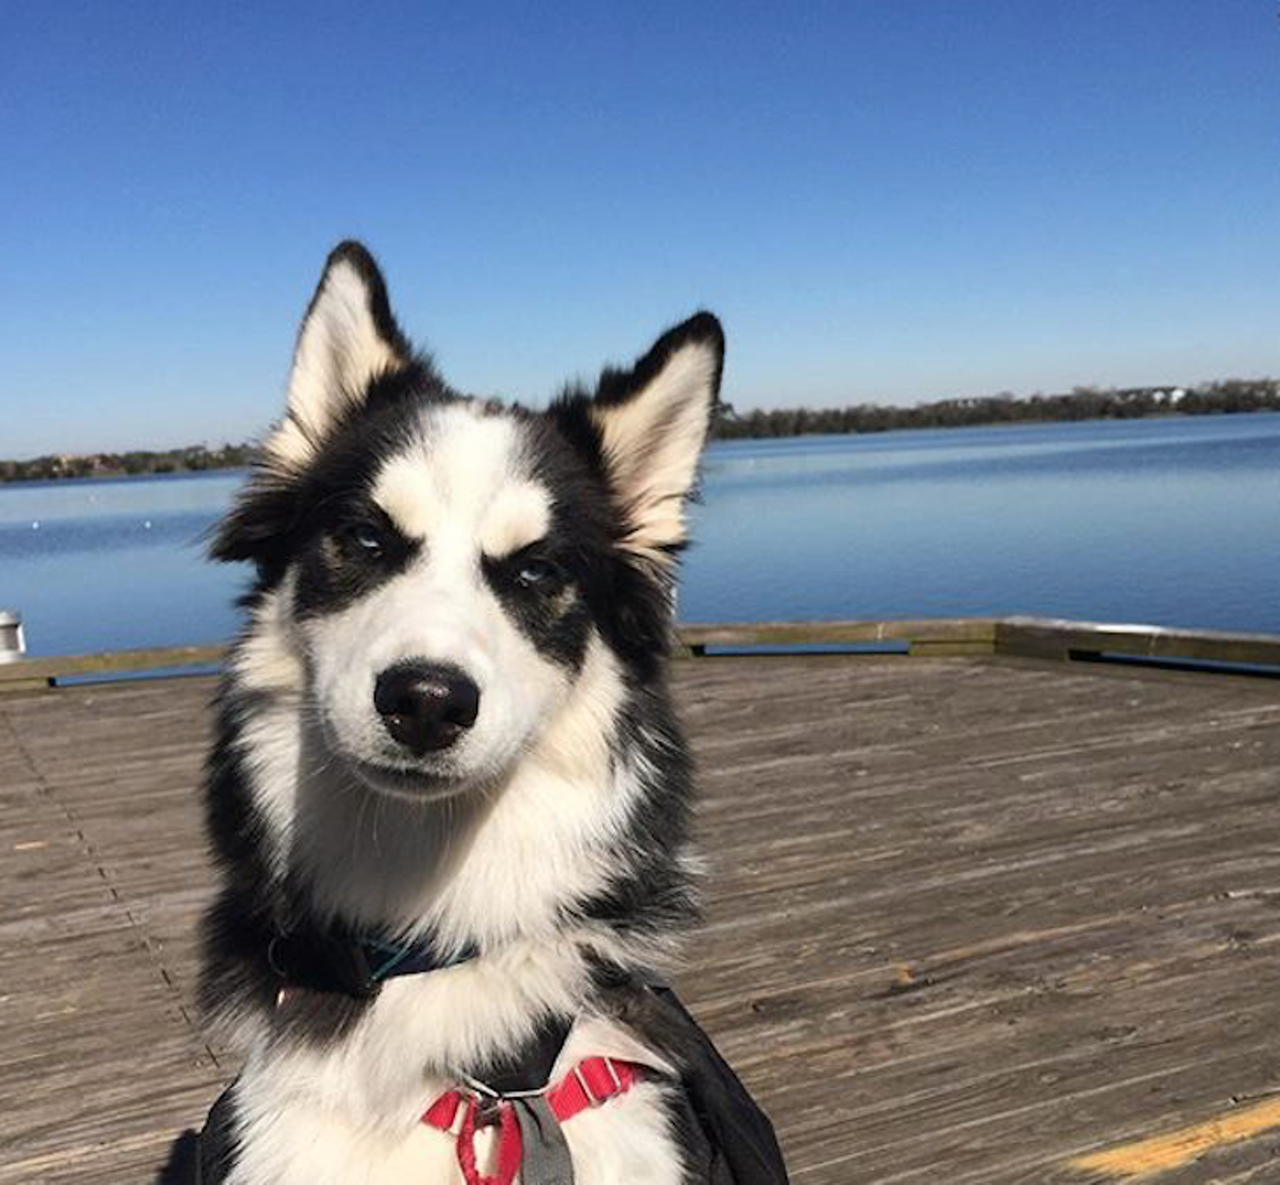 Cady Way Trail e
Have your dog pull on a skateboard along this 6.5-mile urban artery. Just be weary of walkers, runners and cyclists who also frequent this pooch-friendly trail.  
Photo by linux_the_husky/Instagram